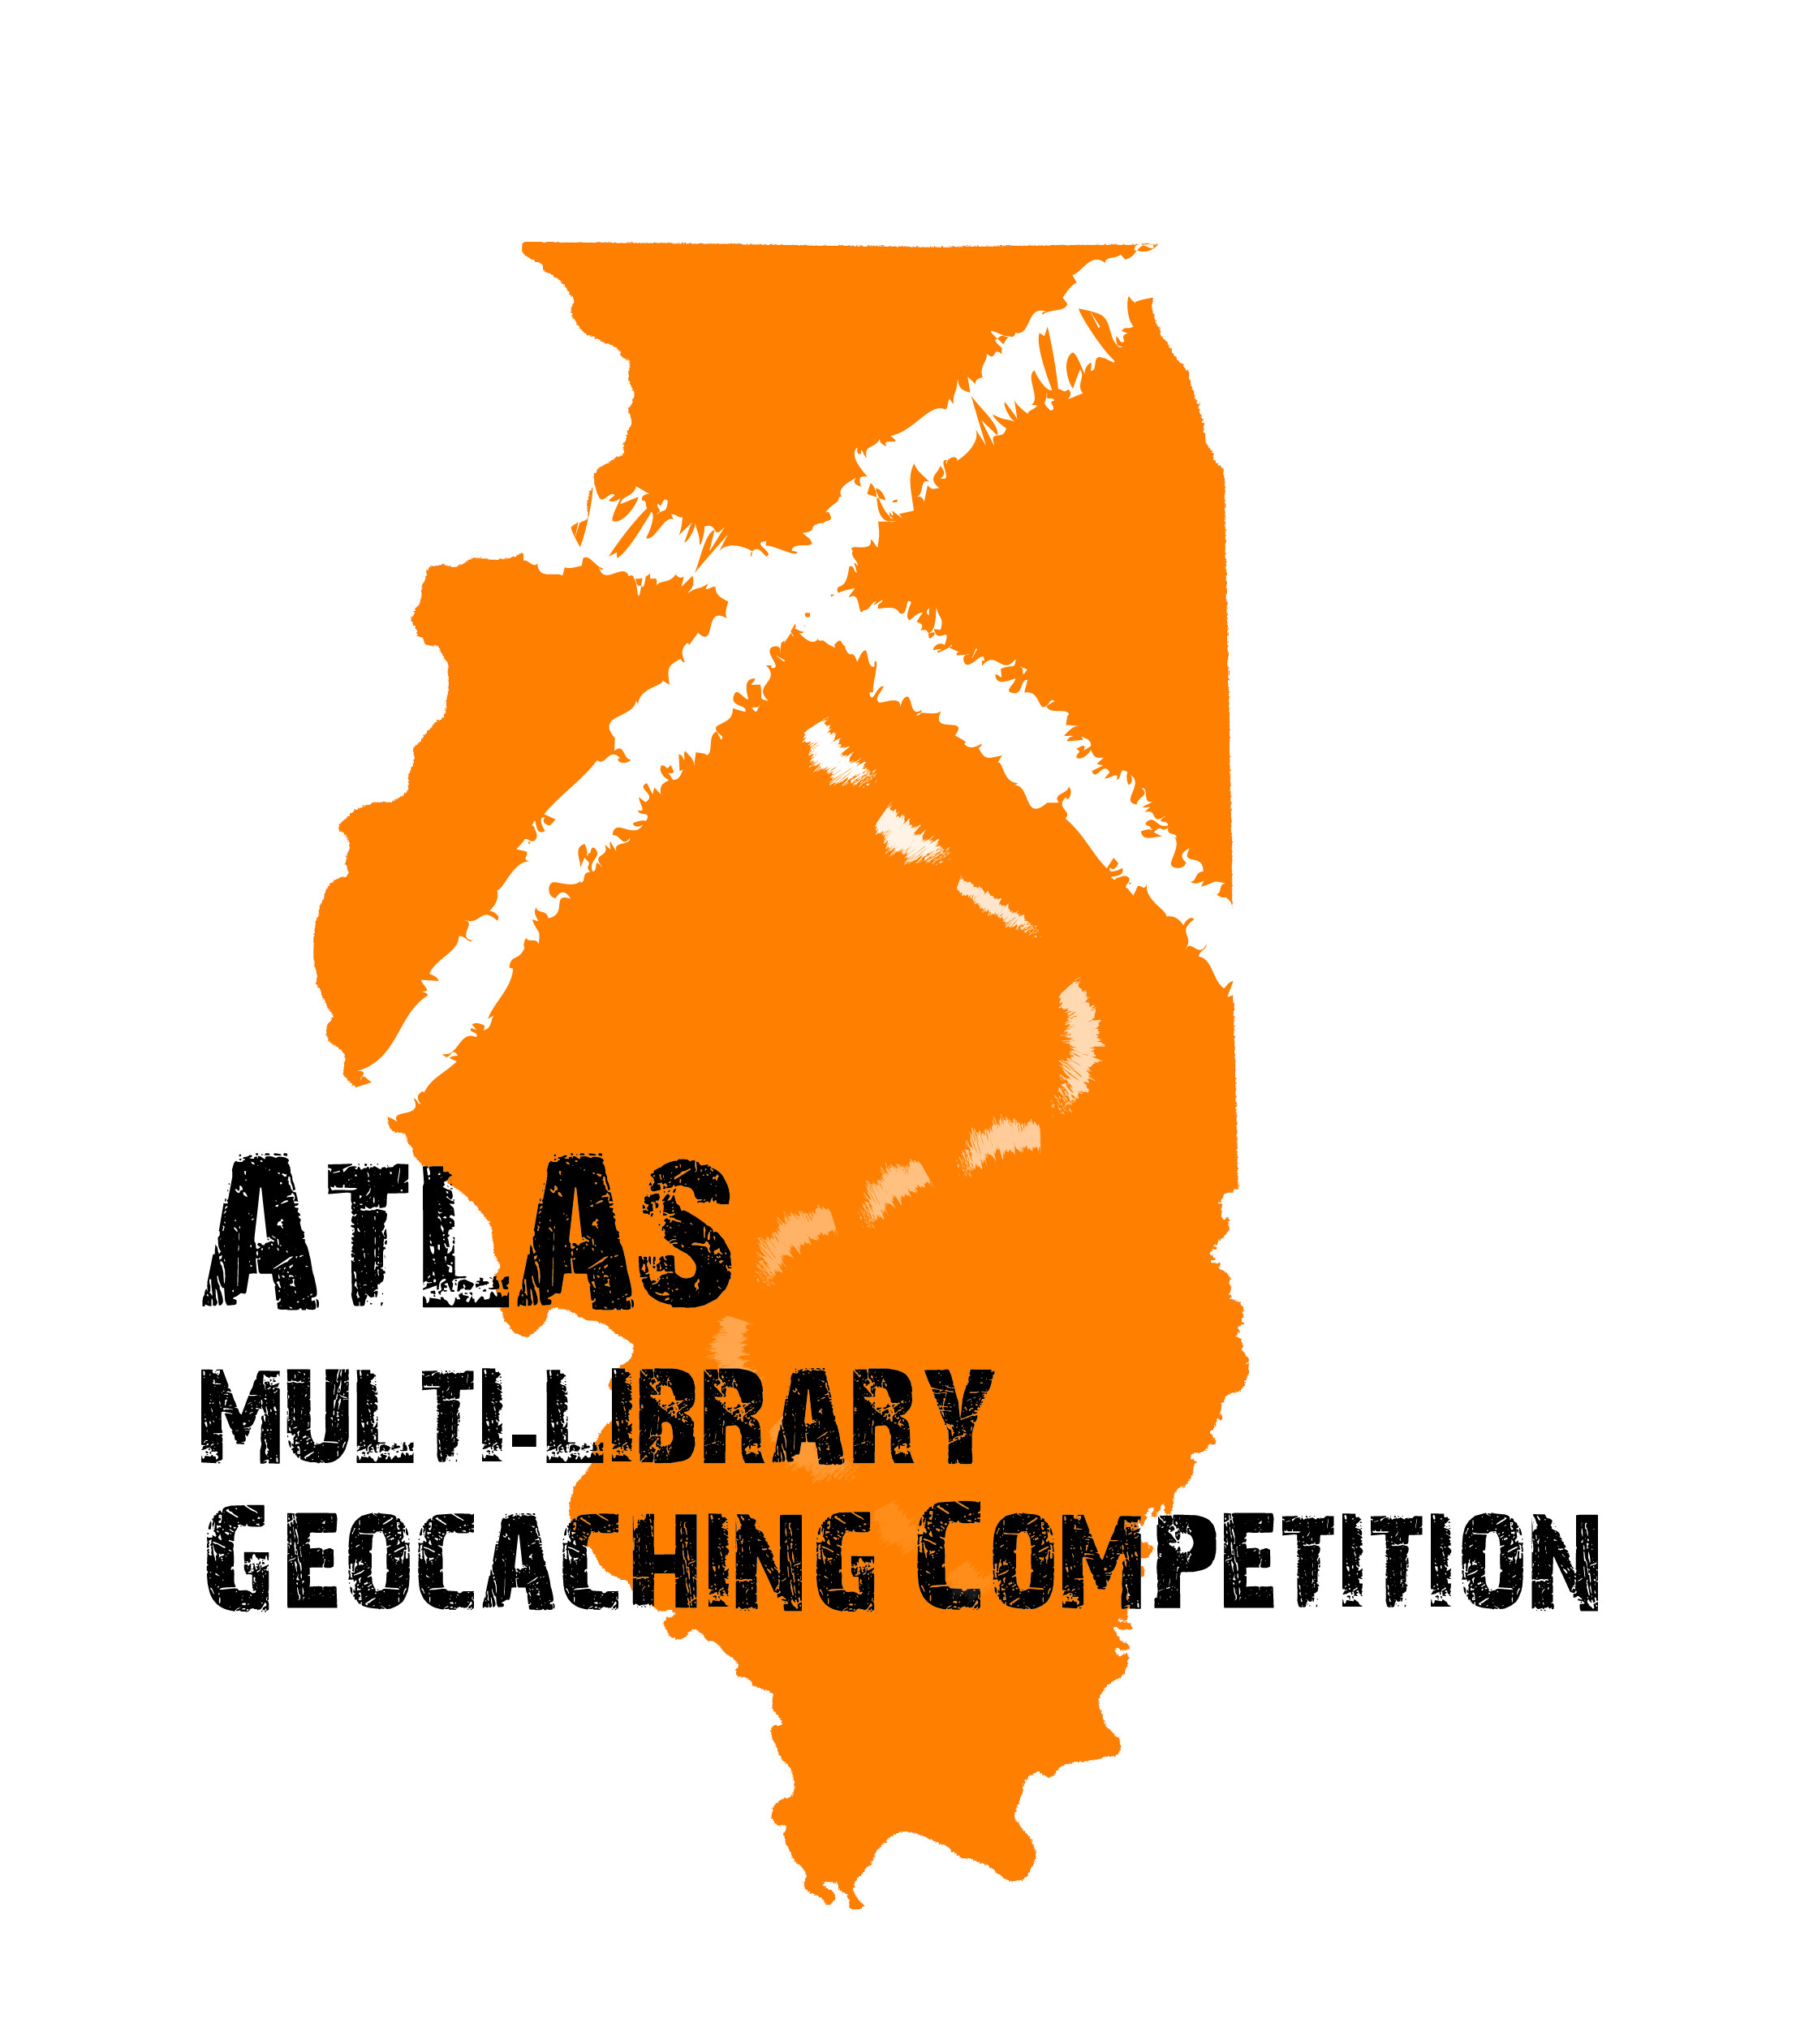 multilibrary geocaching conpetition